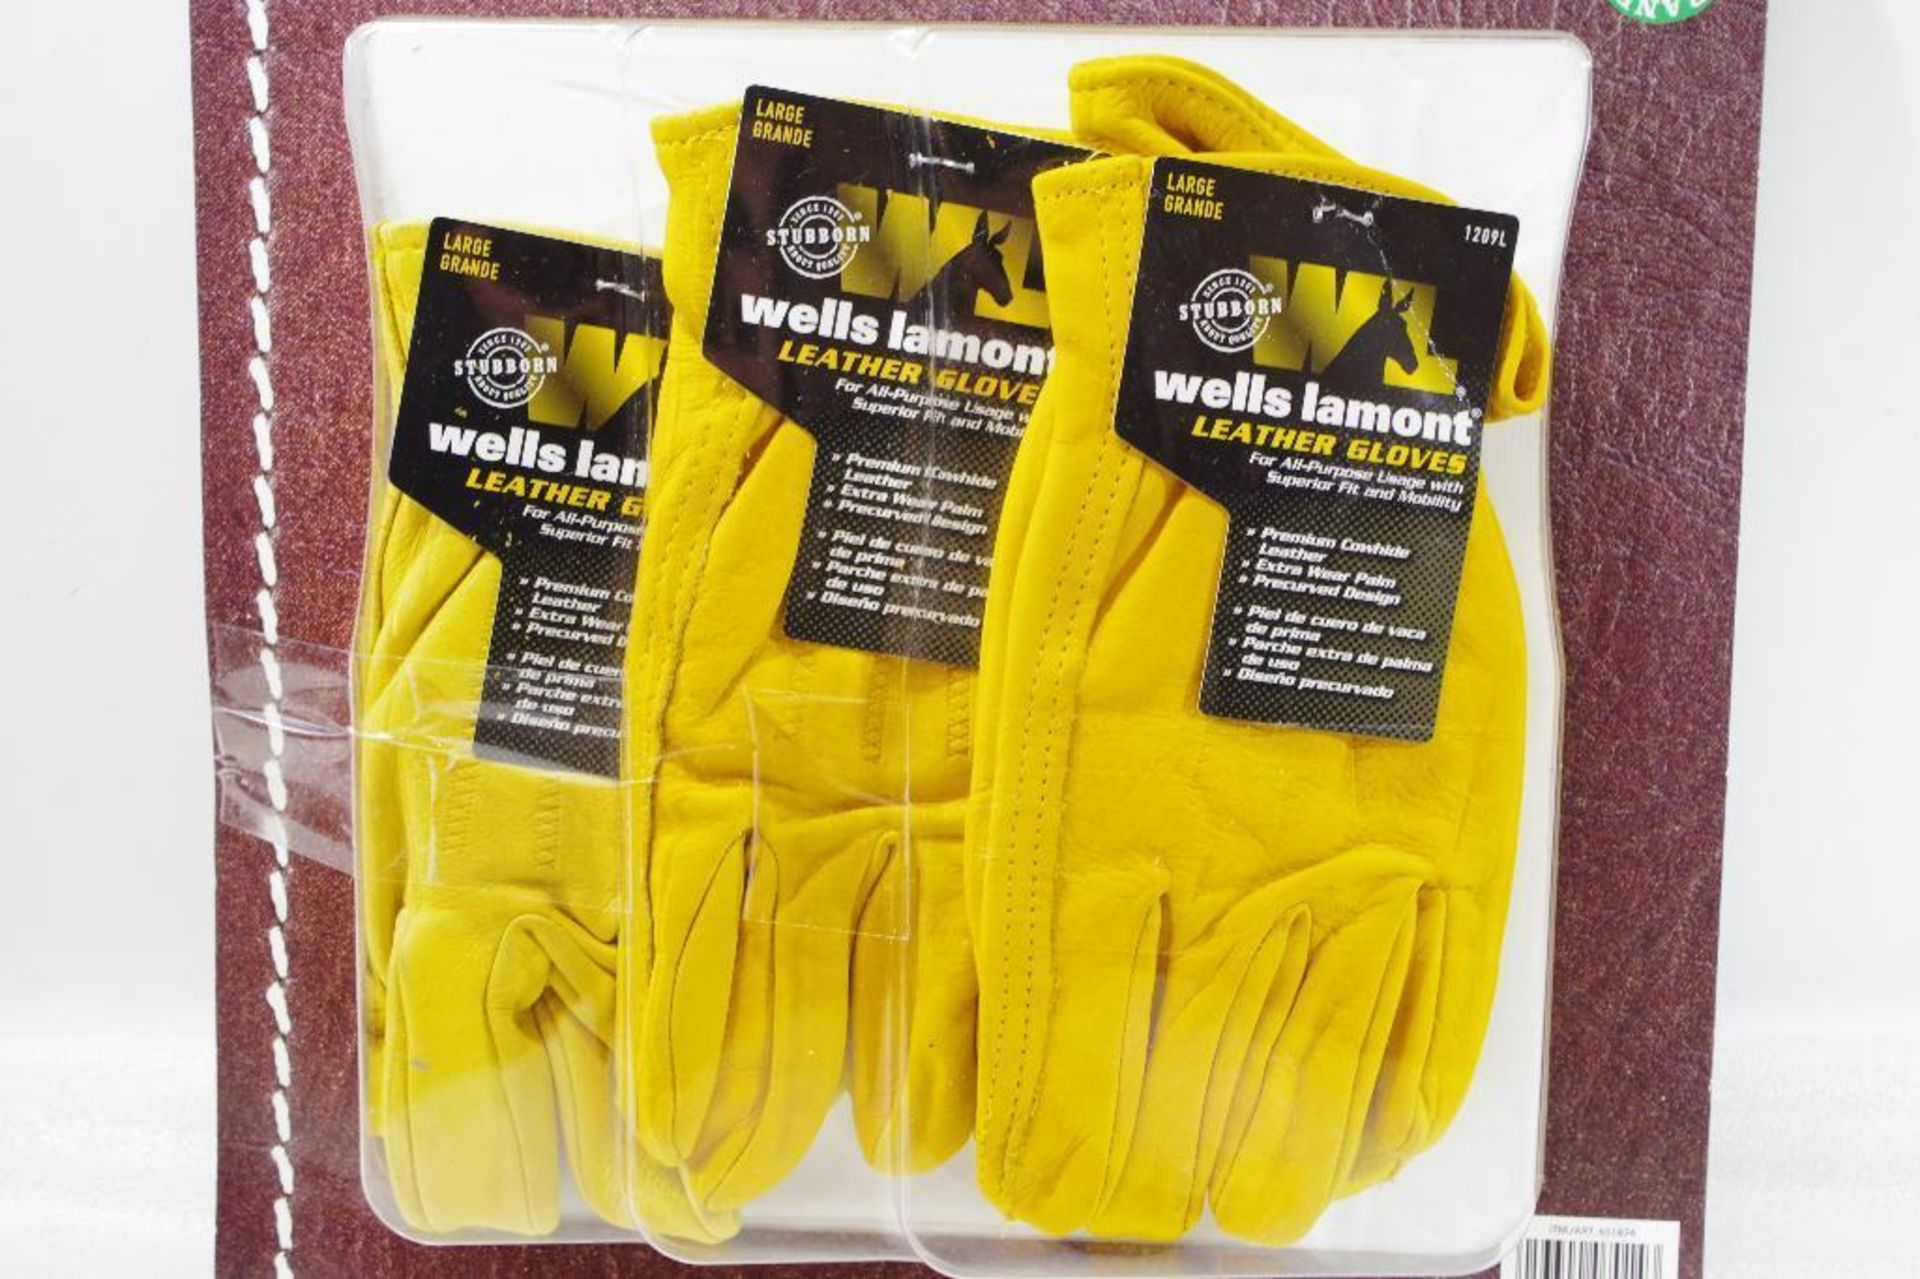 WELLS LAMONT 3-Pair Pack Premium Leather Work Gloves Size: Large - Image 3 of 3